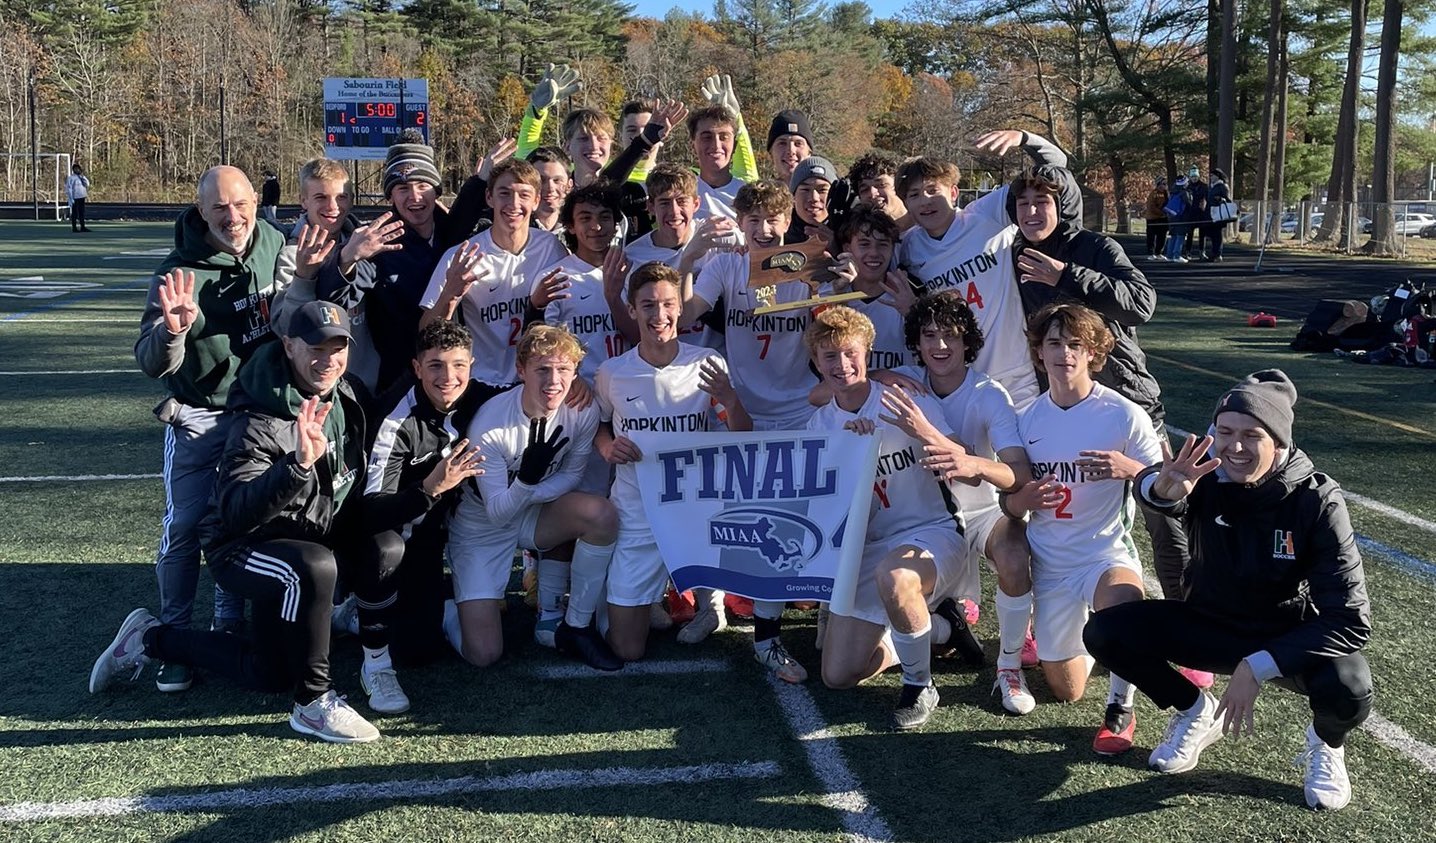 HHS boys soccer knocks off top seed to reach state semifinals